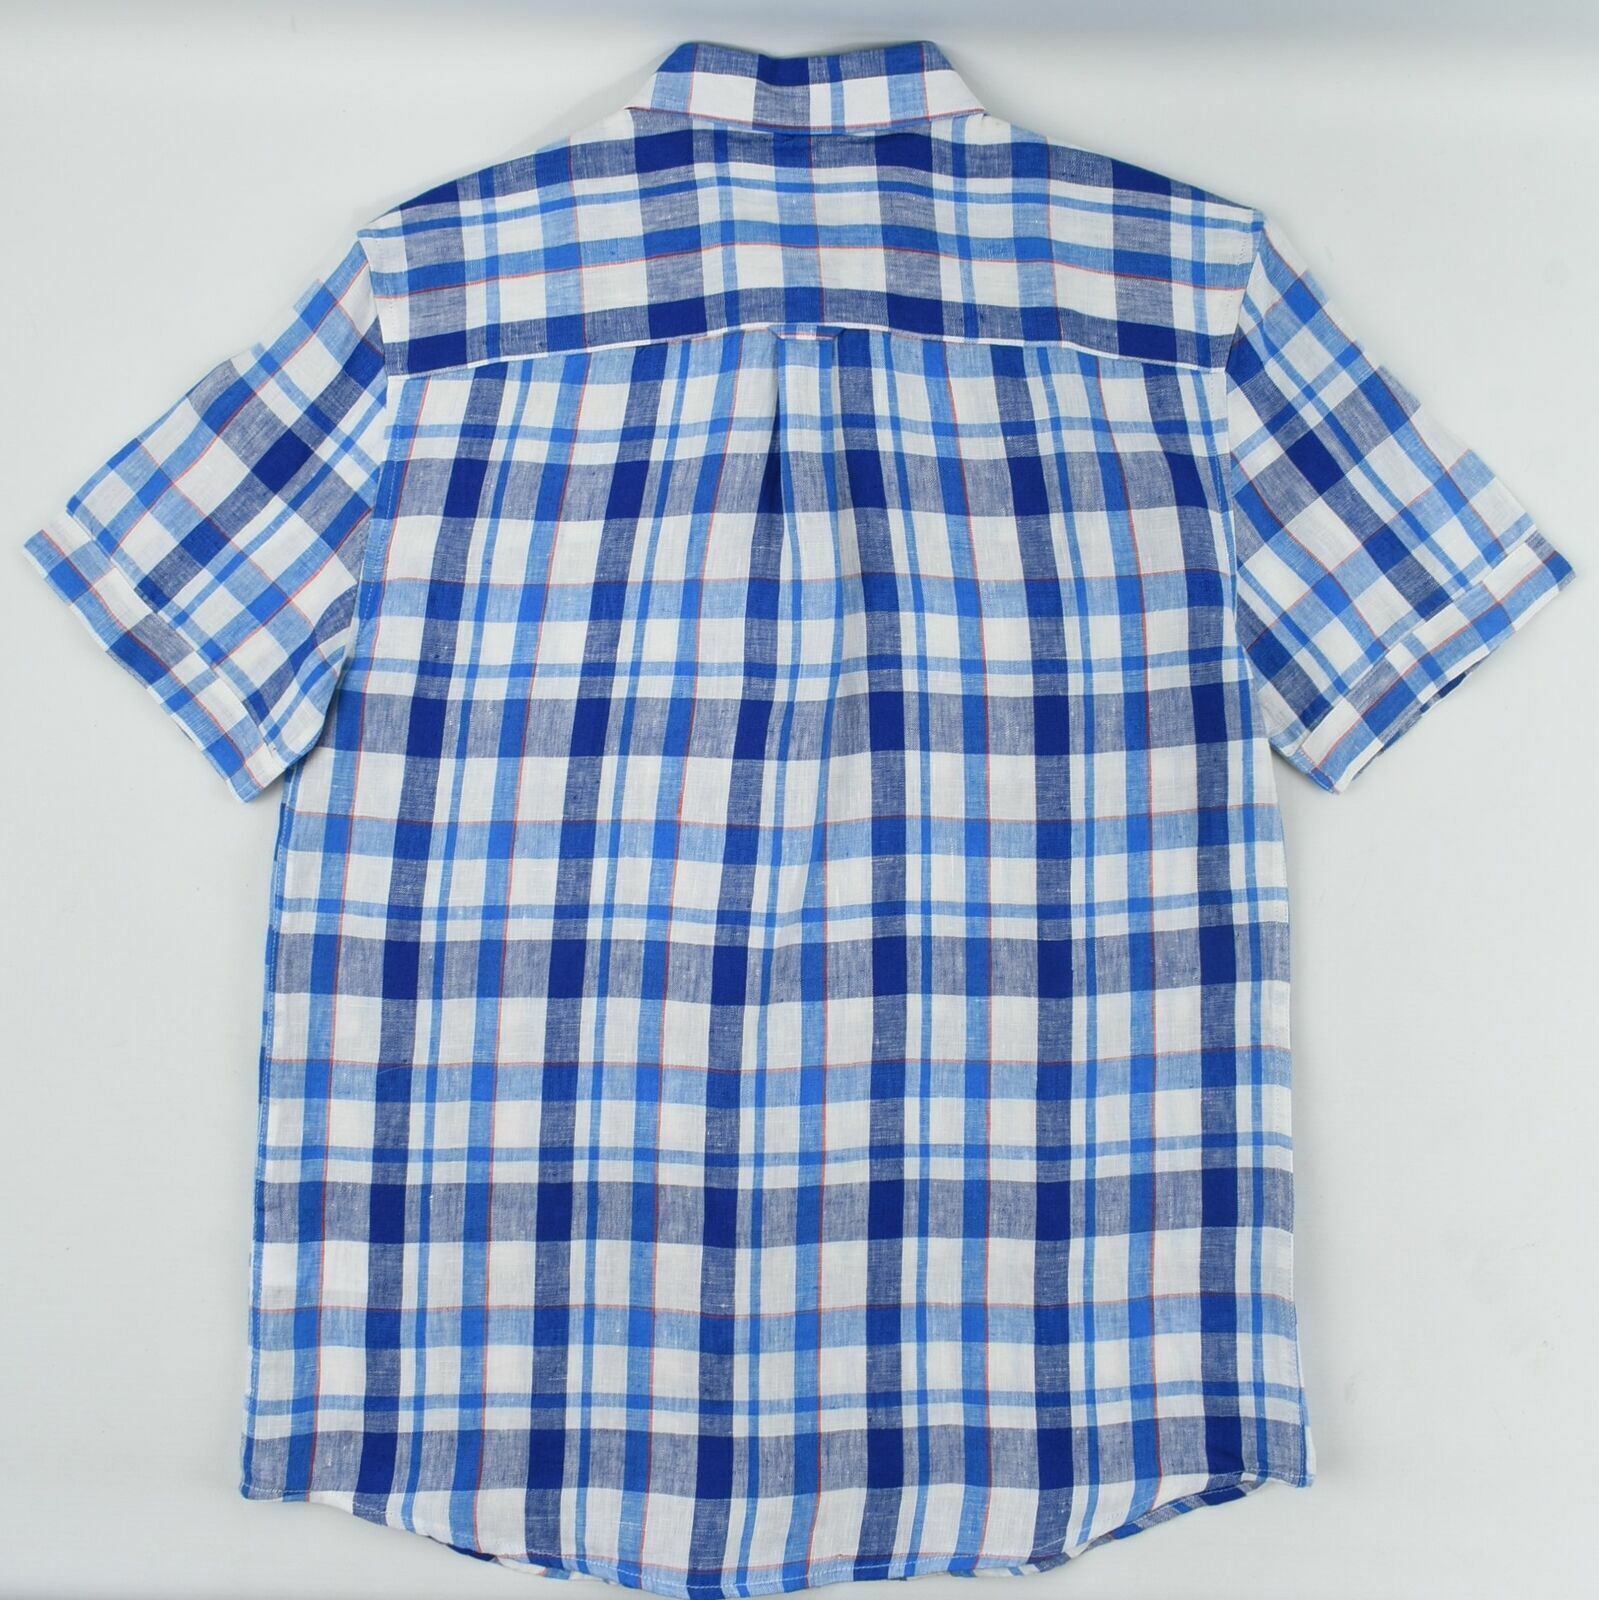 RACING GREEN Men's Blue and White Checked Short Sleeve Linen Shirt Size S